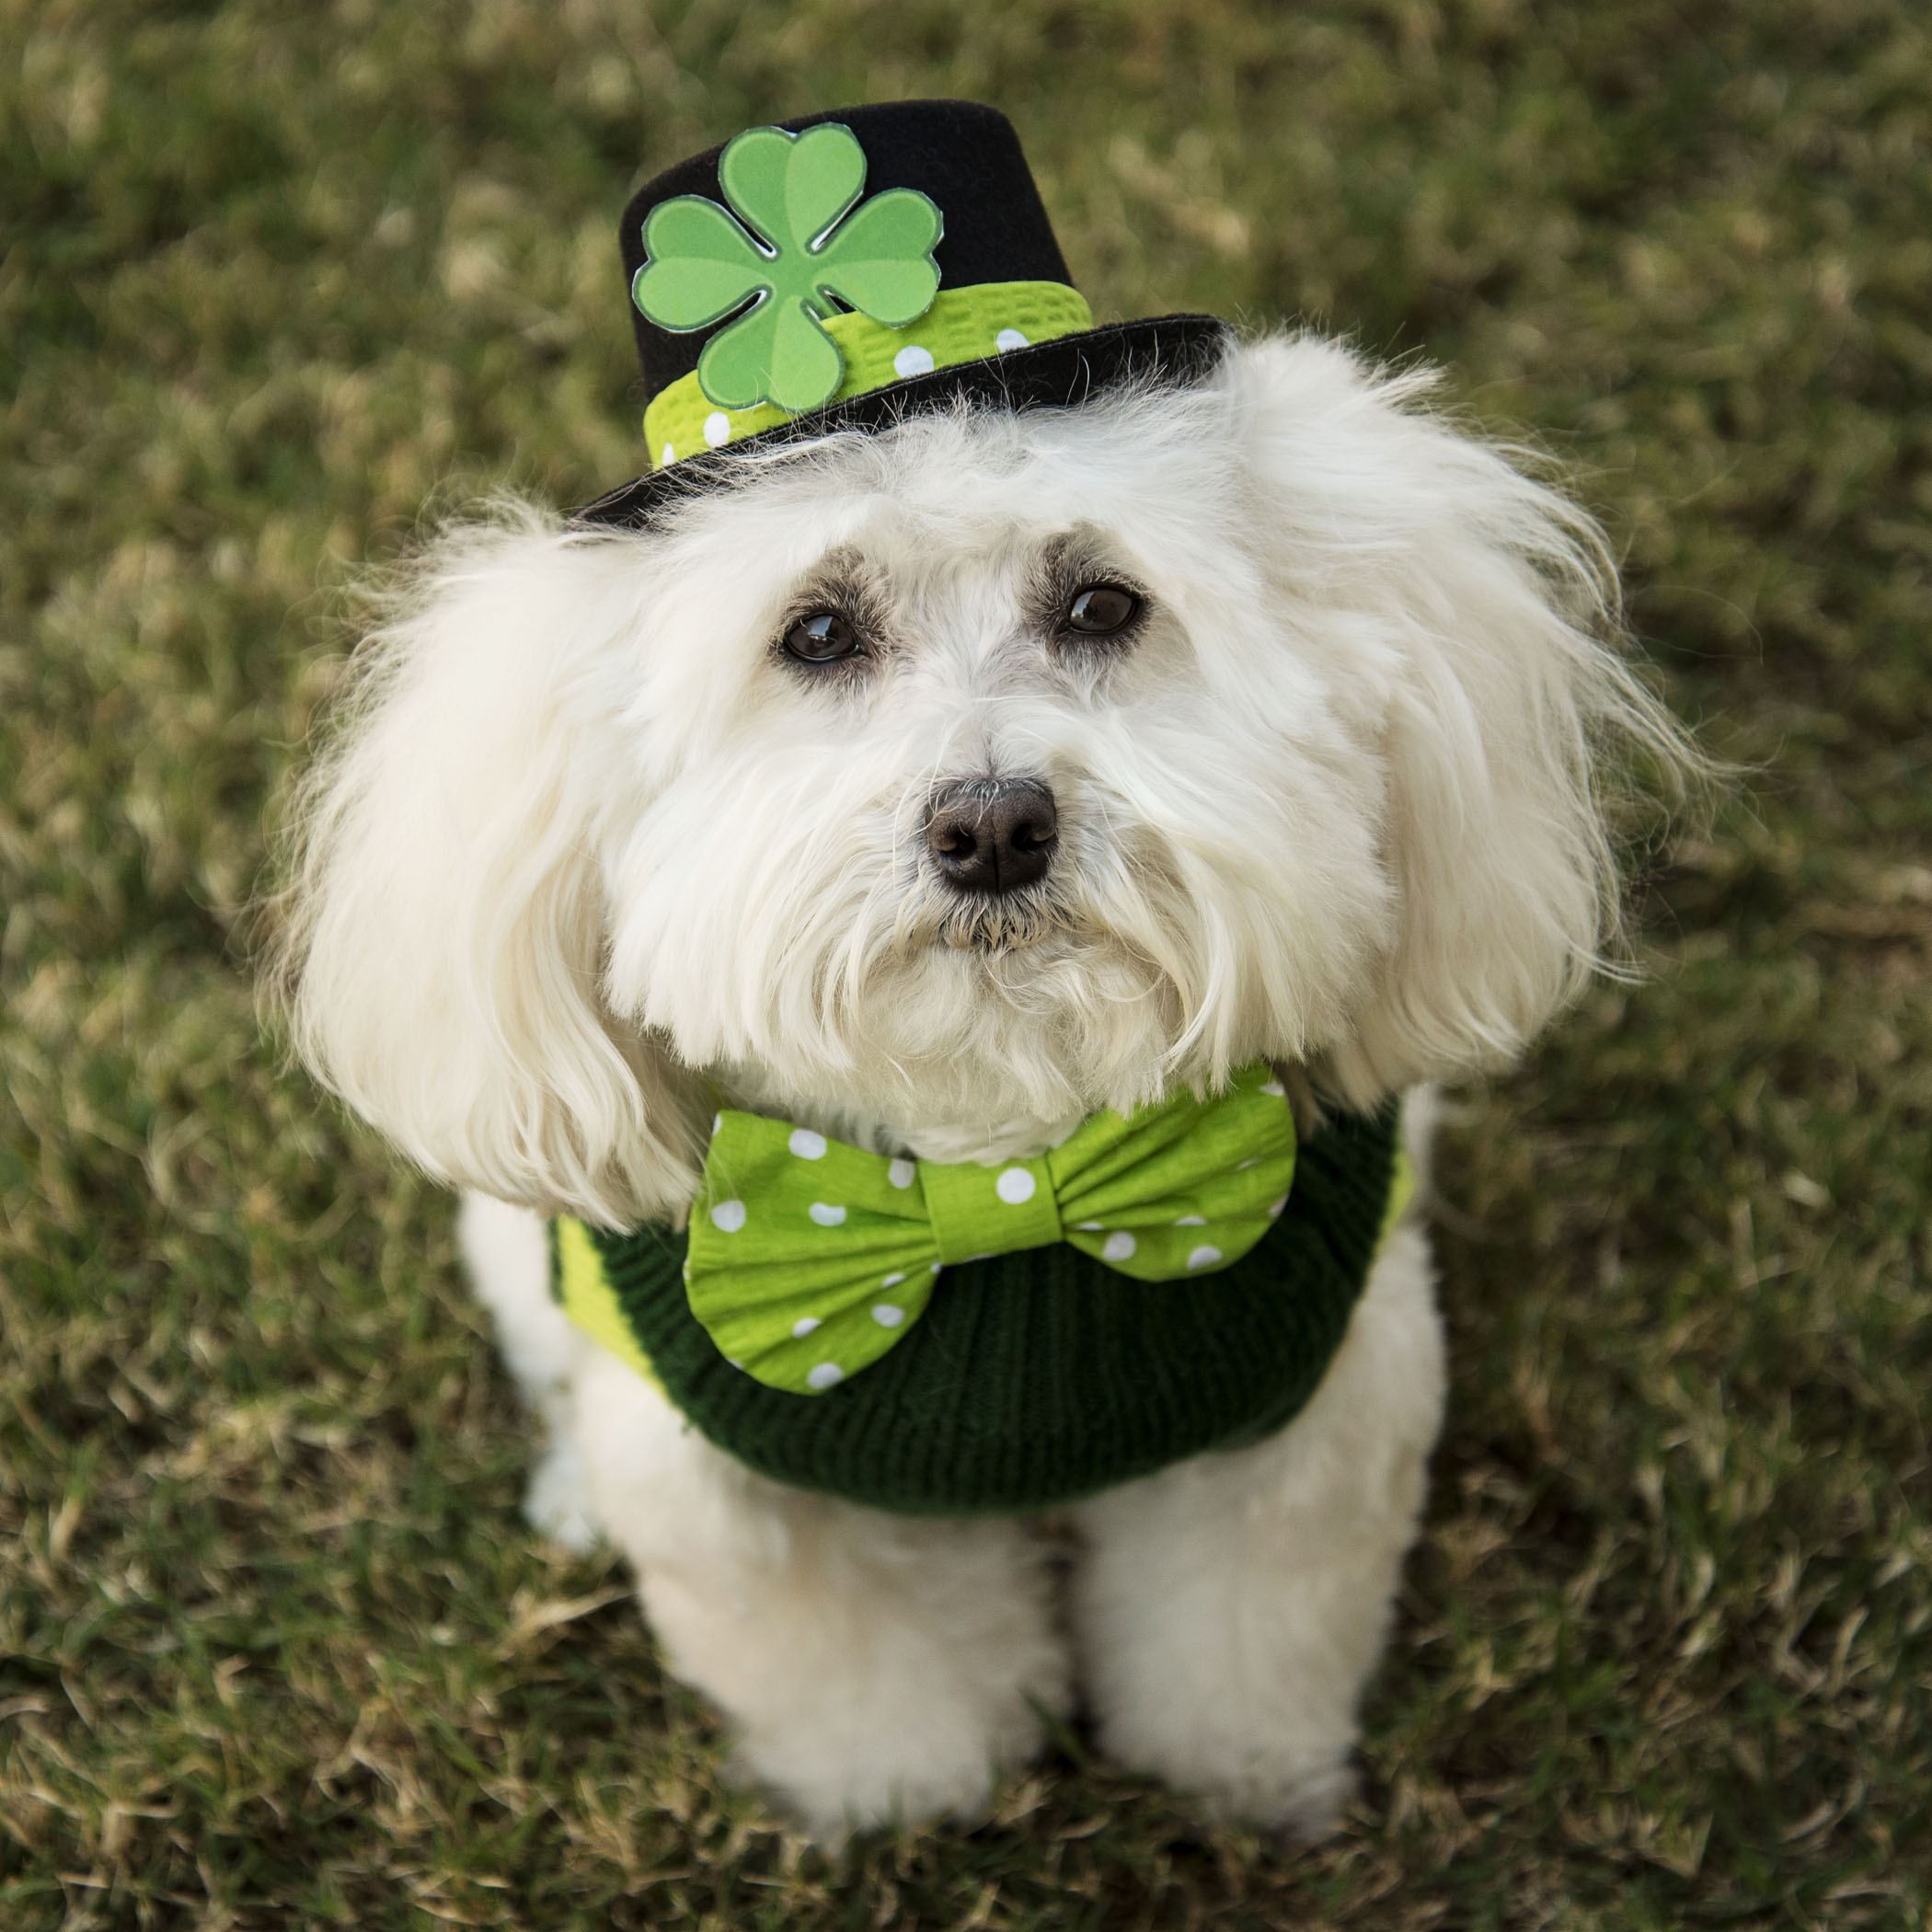  Are you feeling lucky today? Well, you should! Mom only had one St Patty’s day outfit…so instead of a group photo, you will be receiving individual St Patty’s Day photos and greetings from each of us! See, it’s your lucky day!!&nbsp; 